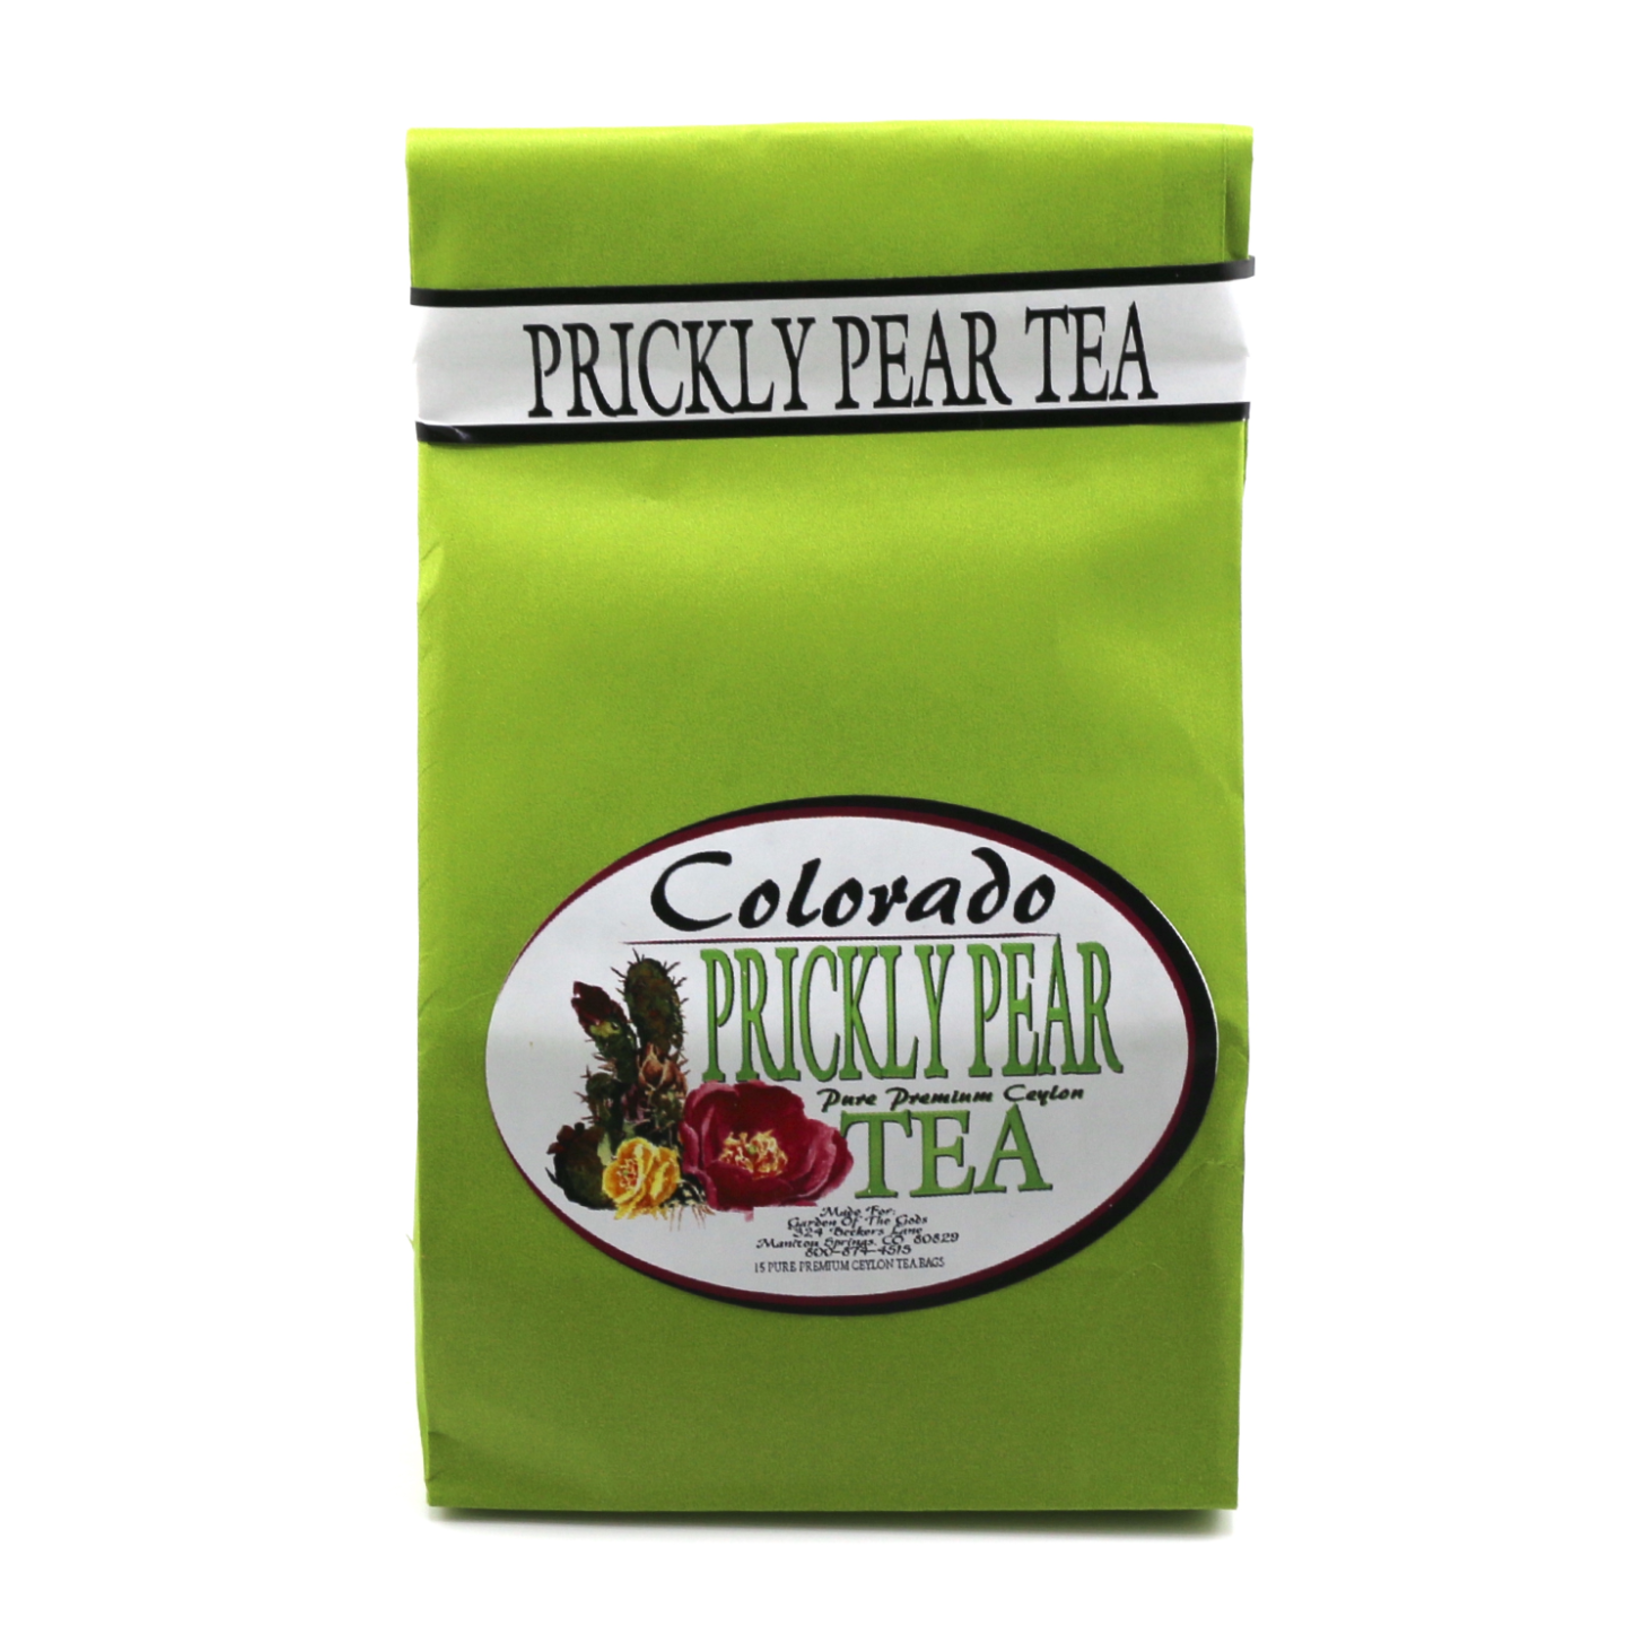 The Huckleberry People Prickly Pear Tea